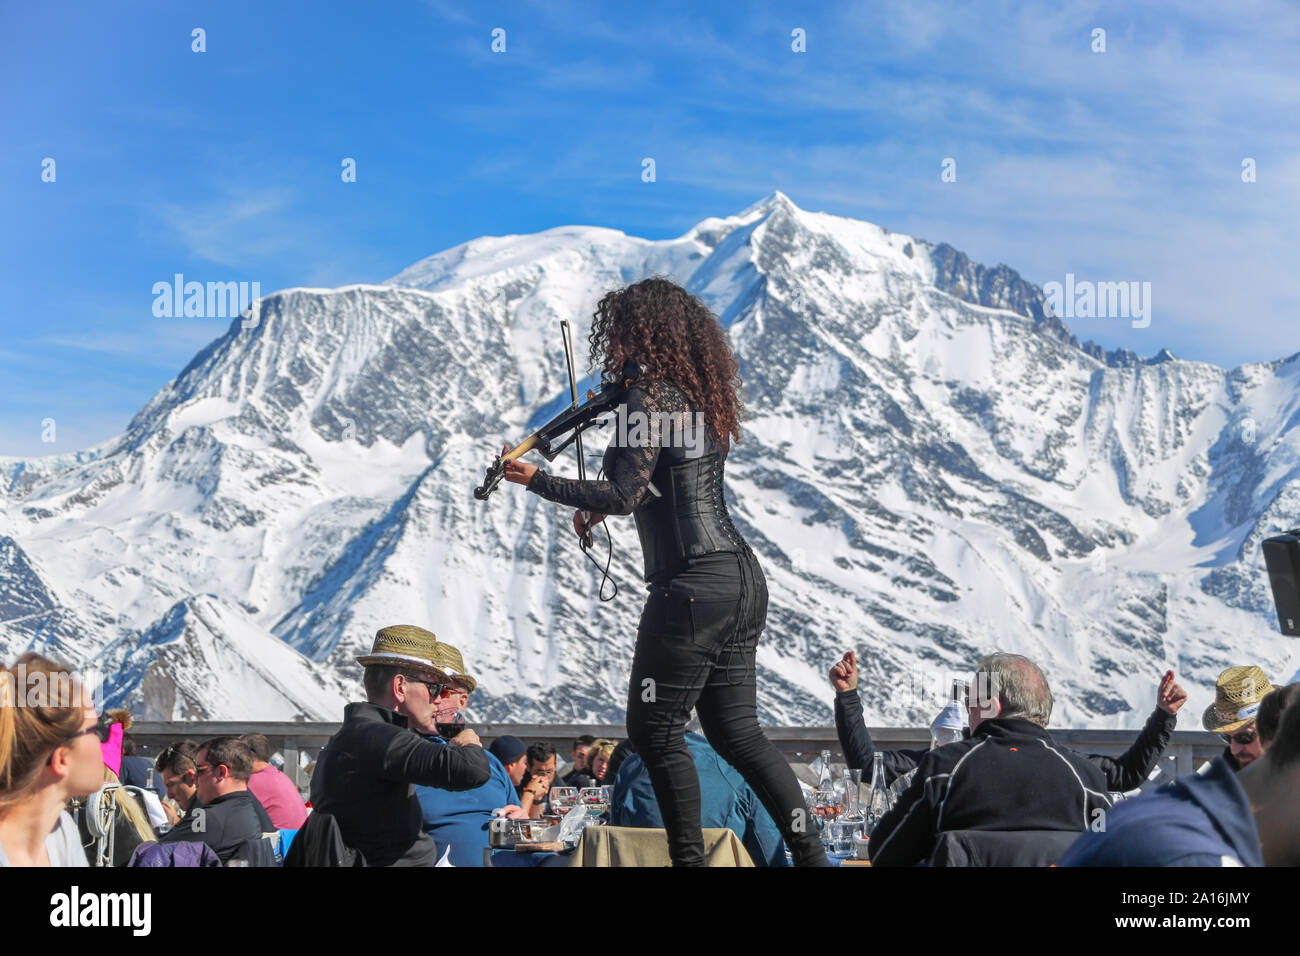 Woman playing violin at after ski restaurant. Mont Blanc in the back on a sunny winter day. La Folie Douce Saint Gervais Restaurant of Chamonix. Stock Photo